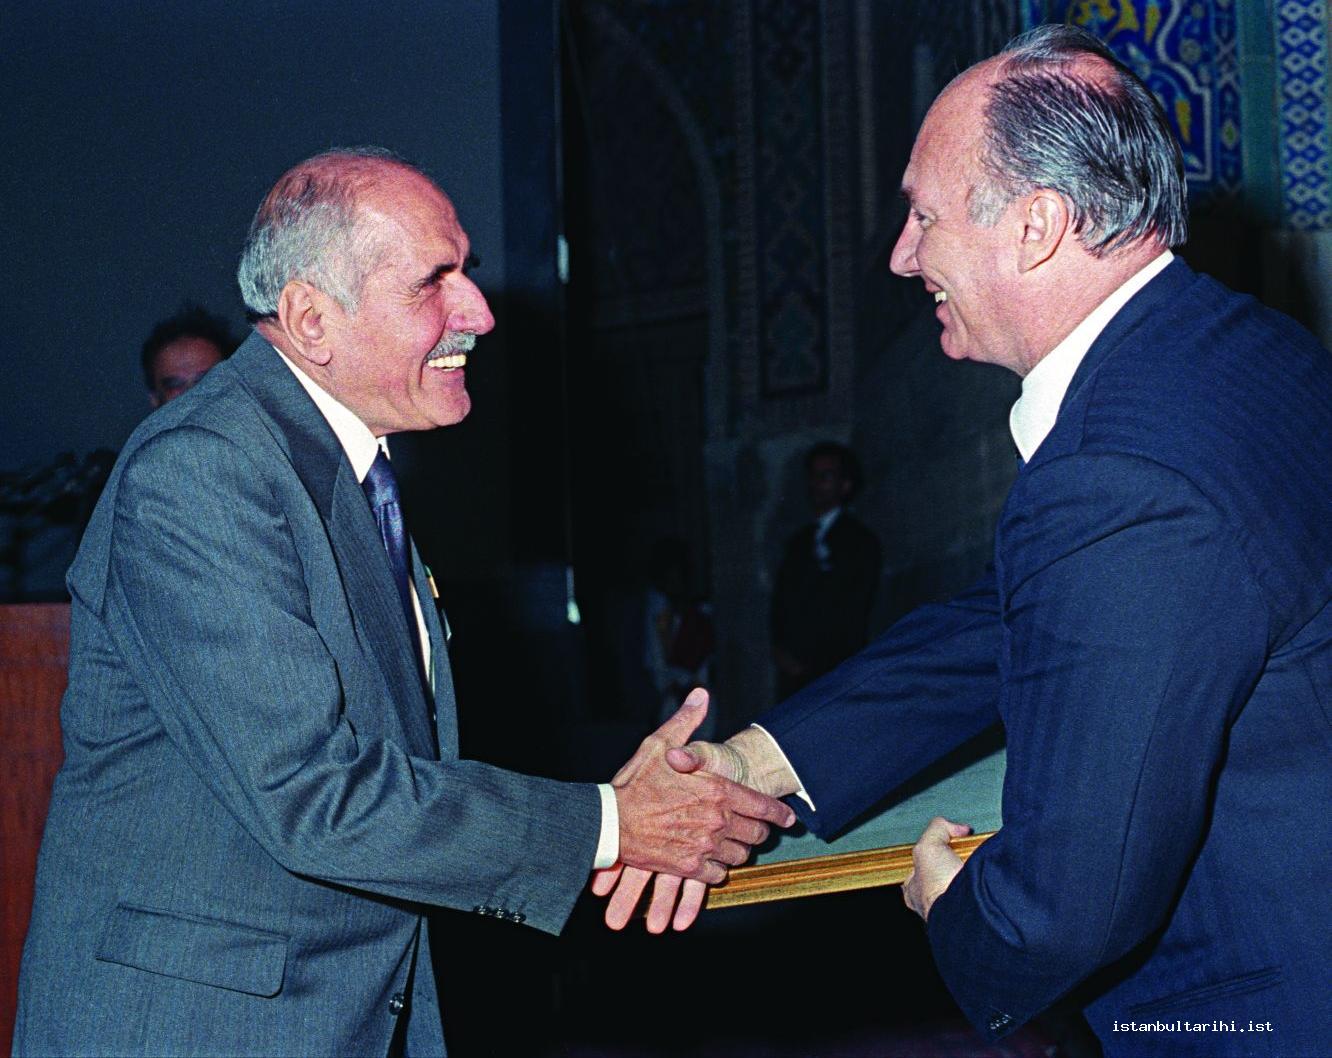 4- Turgut Cansever while getting his award from Ağa Han    